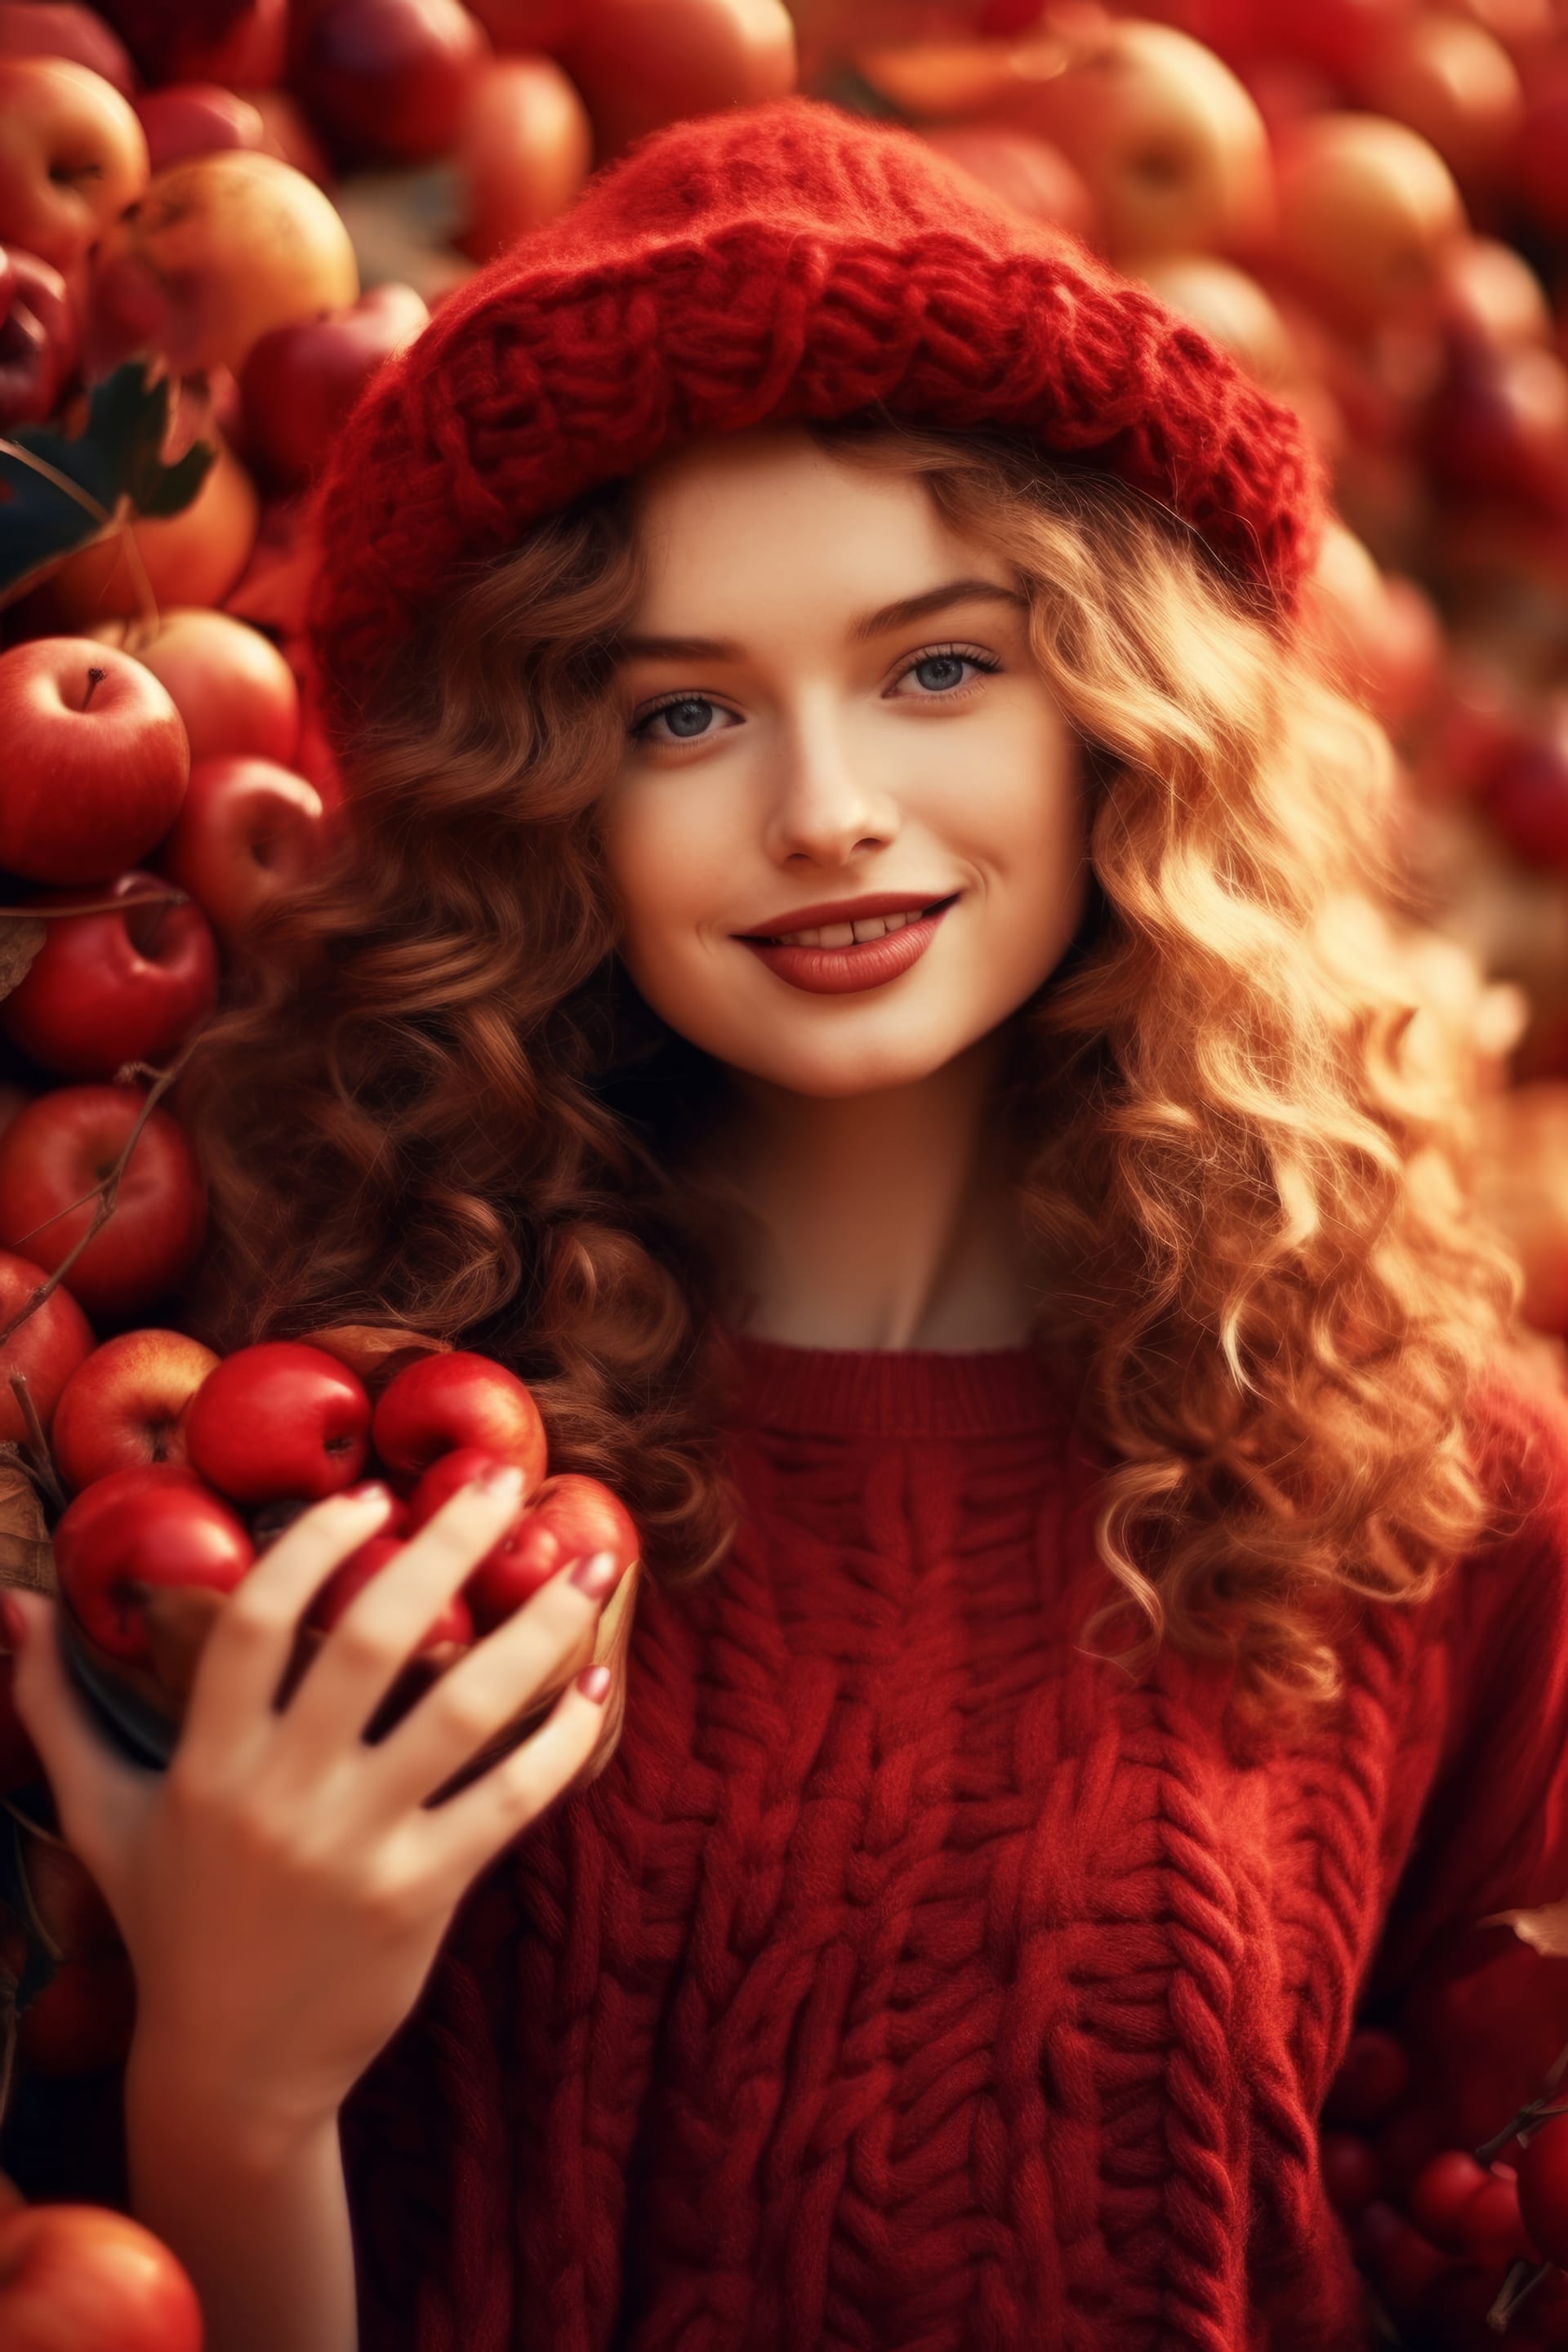 Girl with red hair red hat holds apples